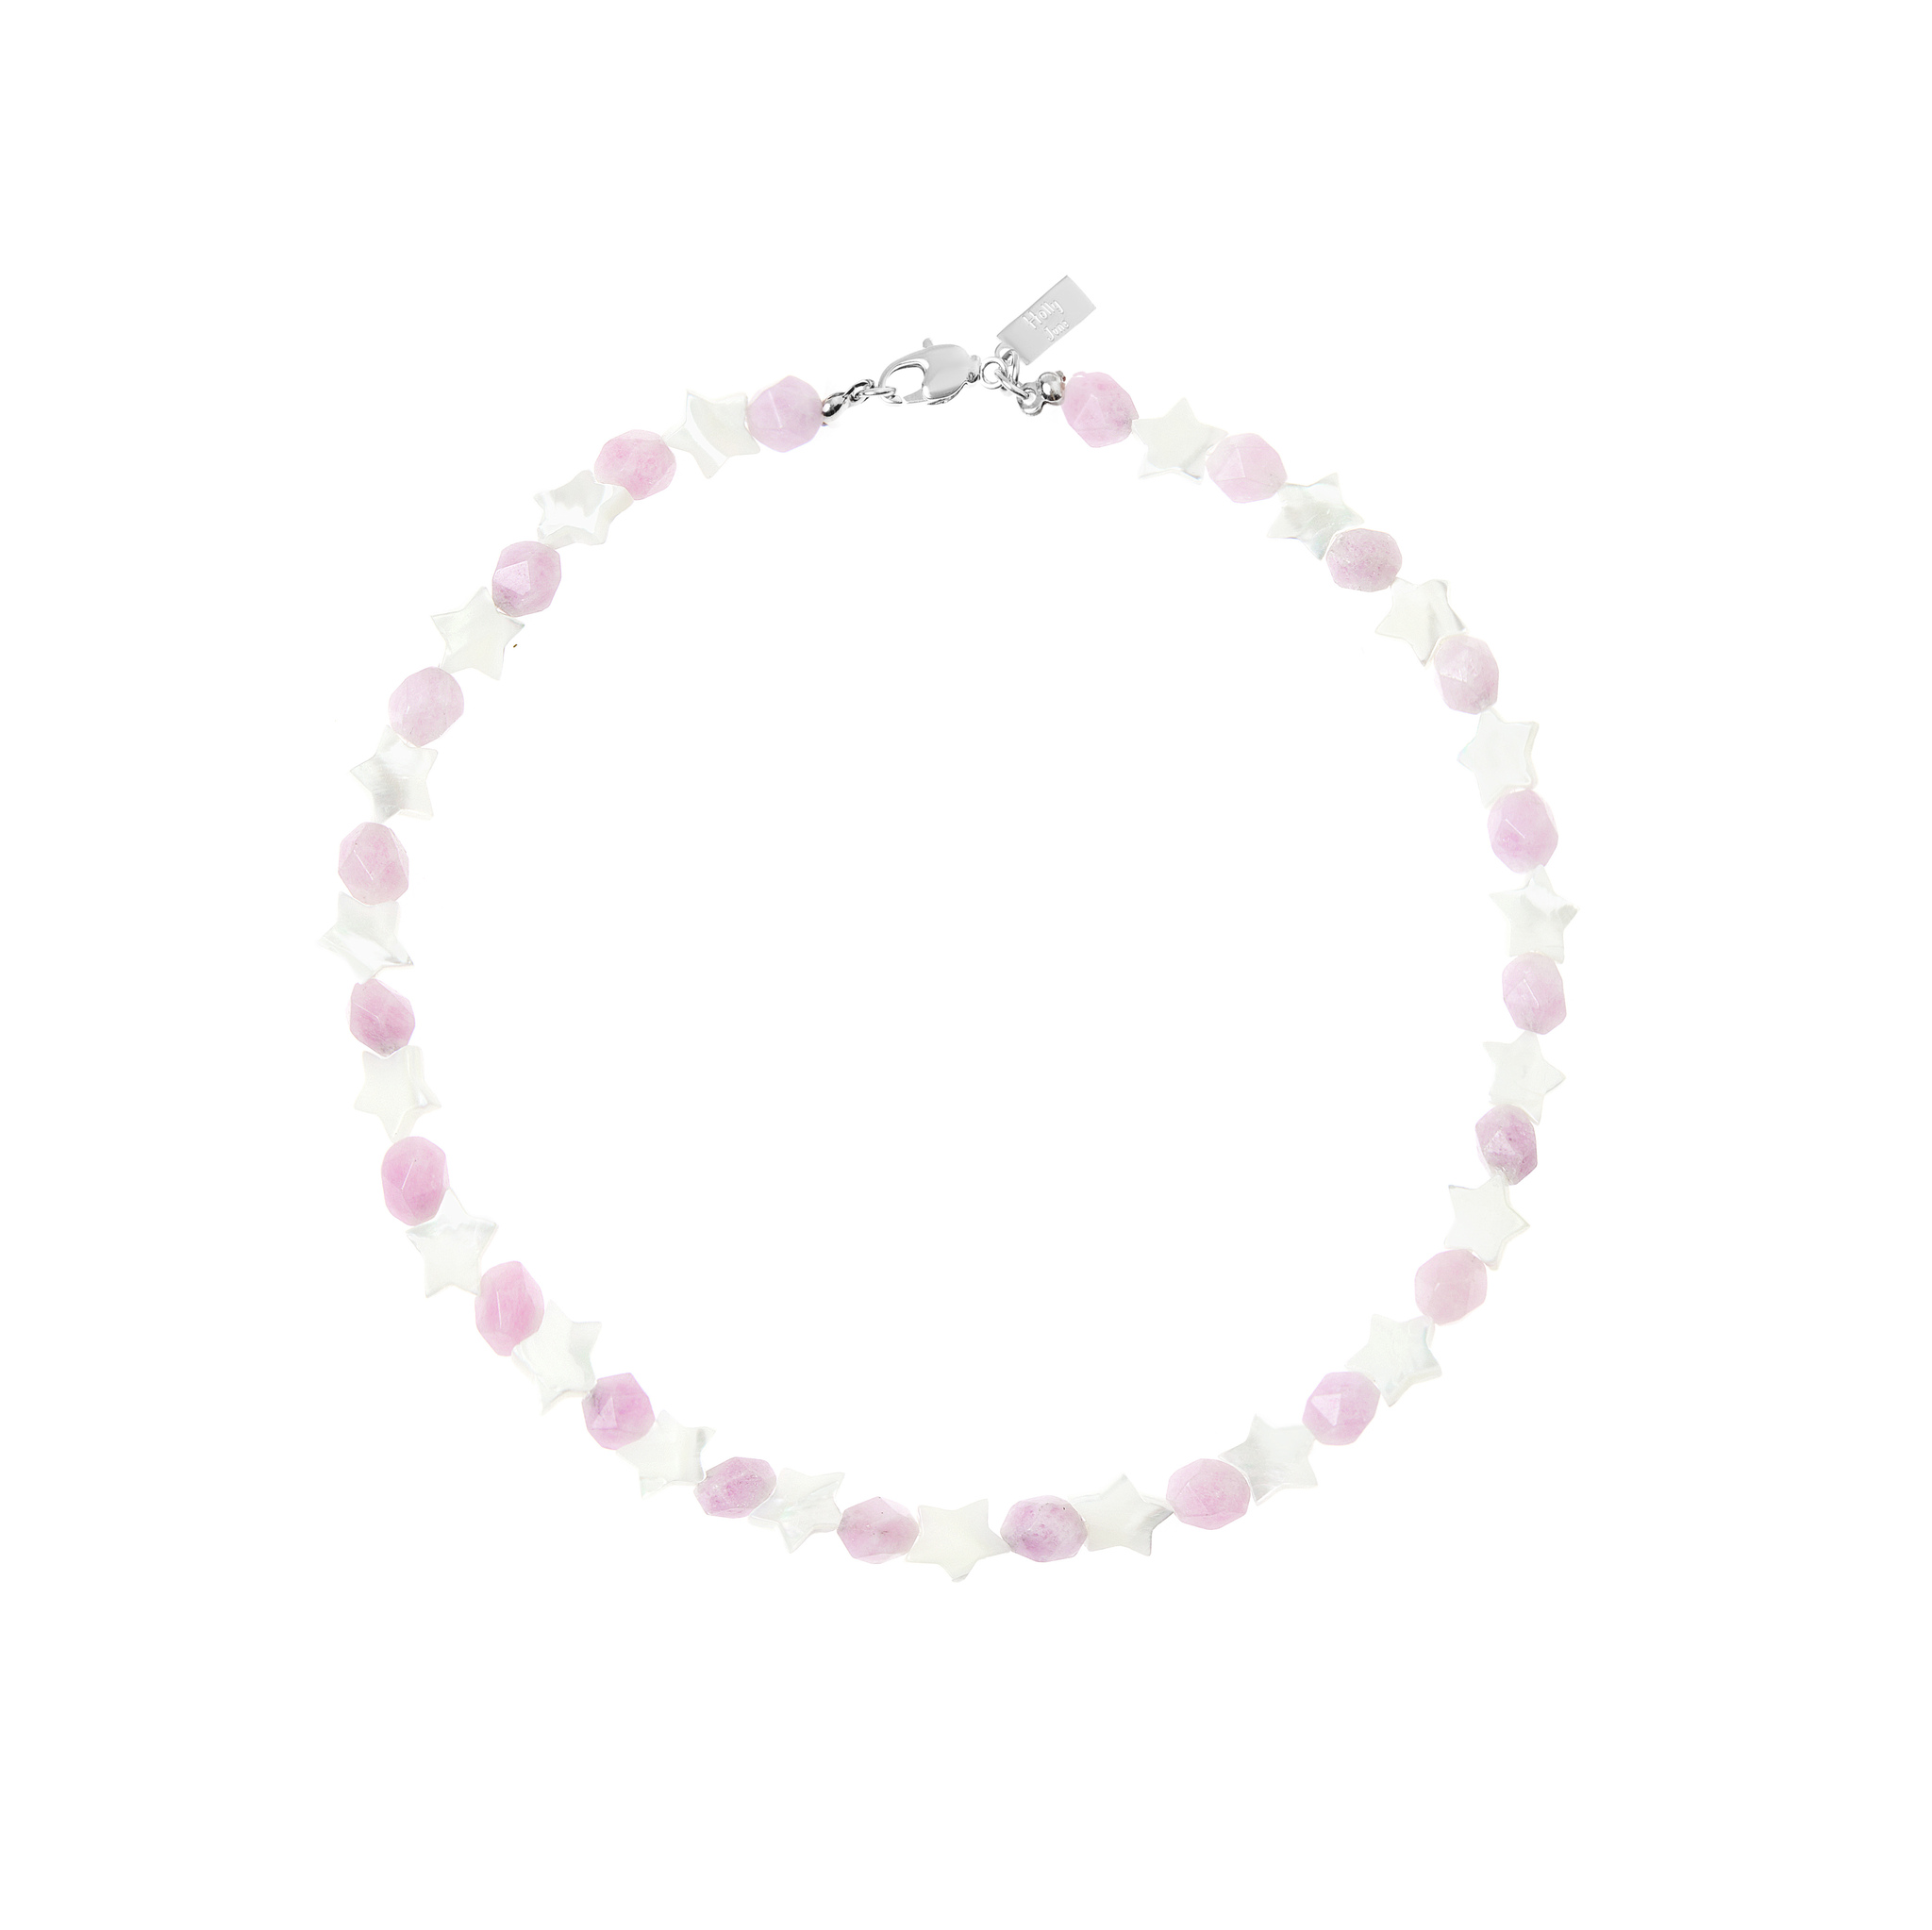 HOLLY JUNE Колье Candy Star Necklace – Lilac holly june колье neon pink star necklace